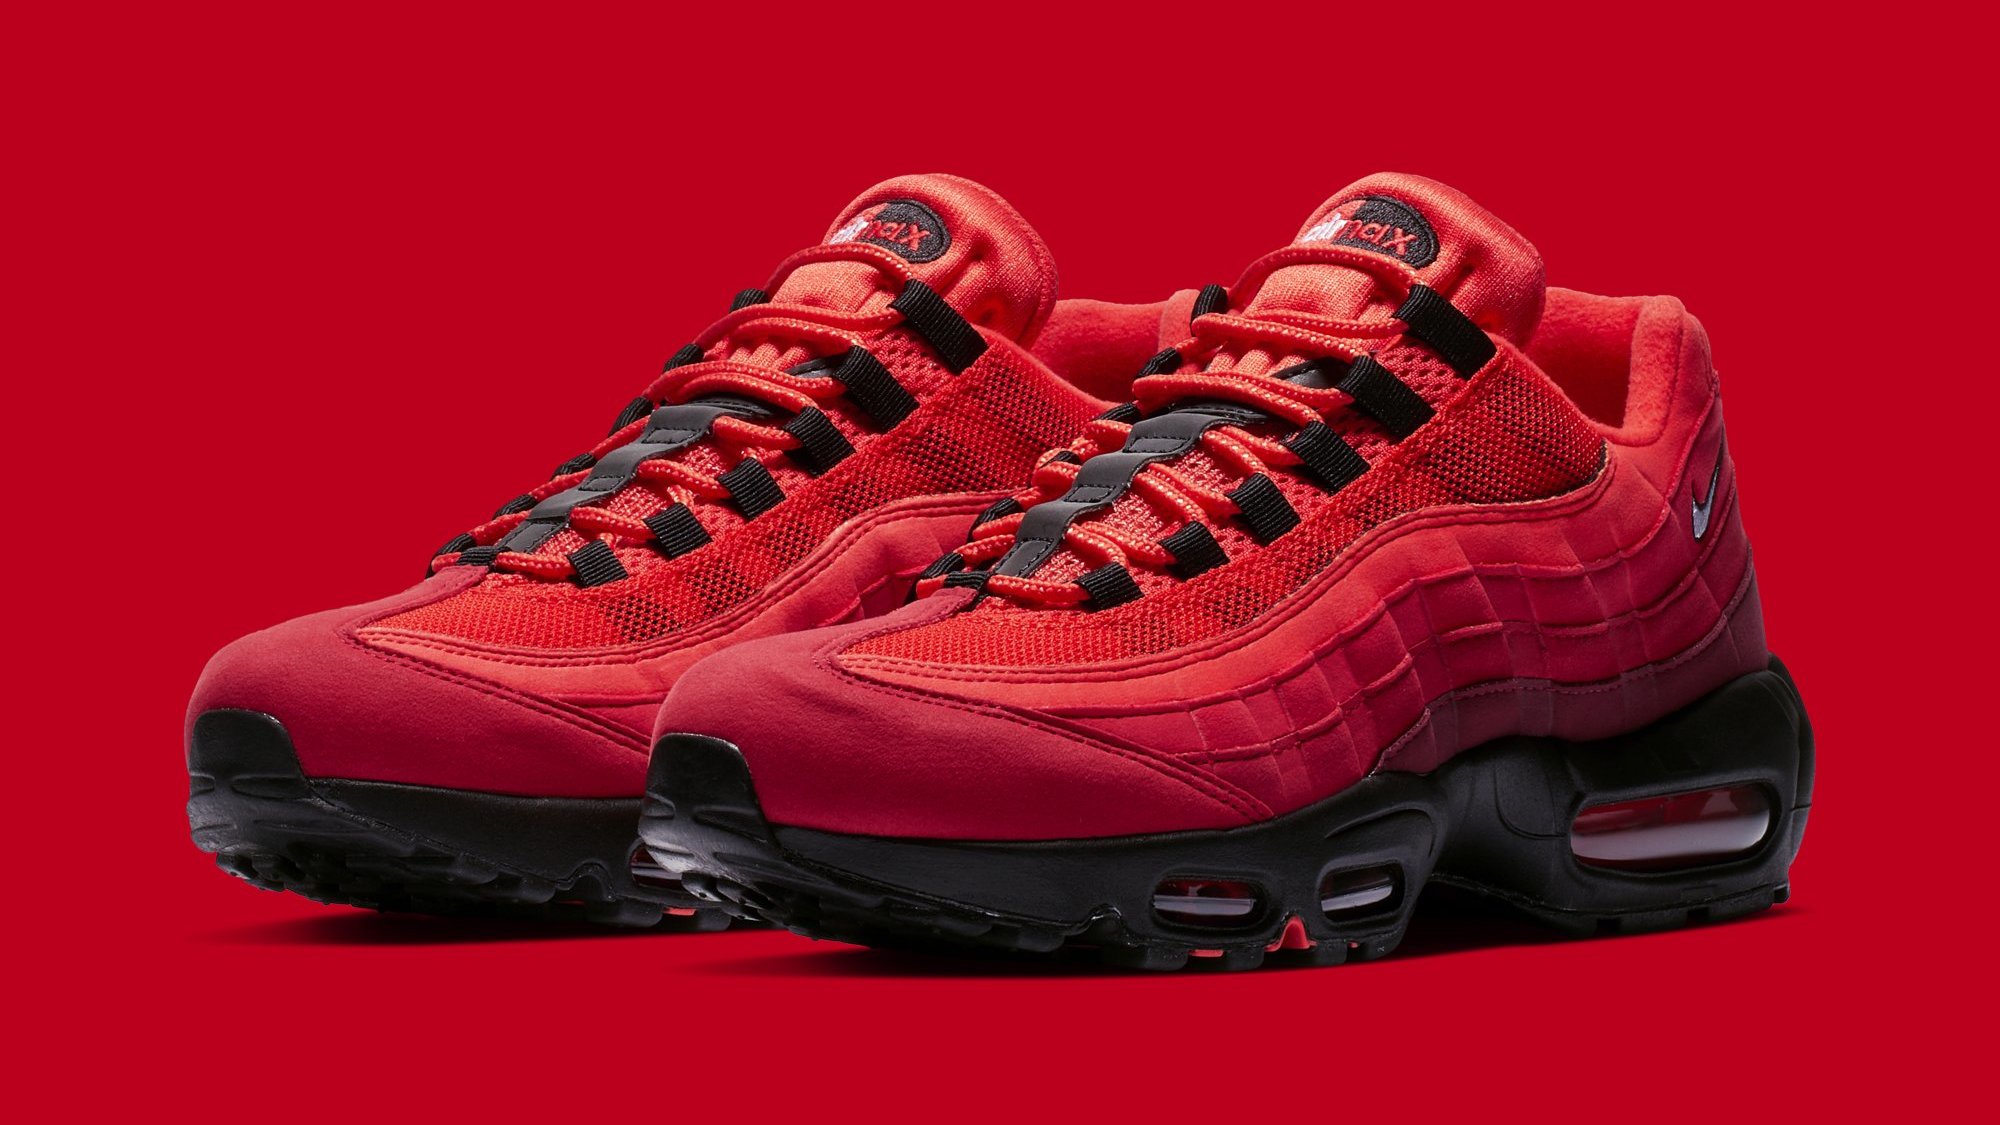 isolatie Spuug uit plank Habanero Red' Nike Air Max 95s on the Way | Complex